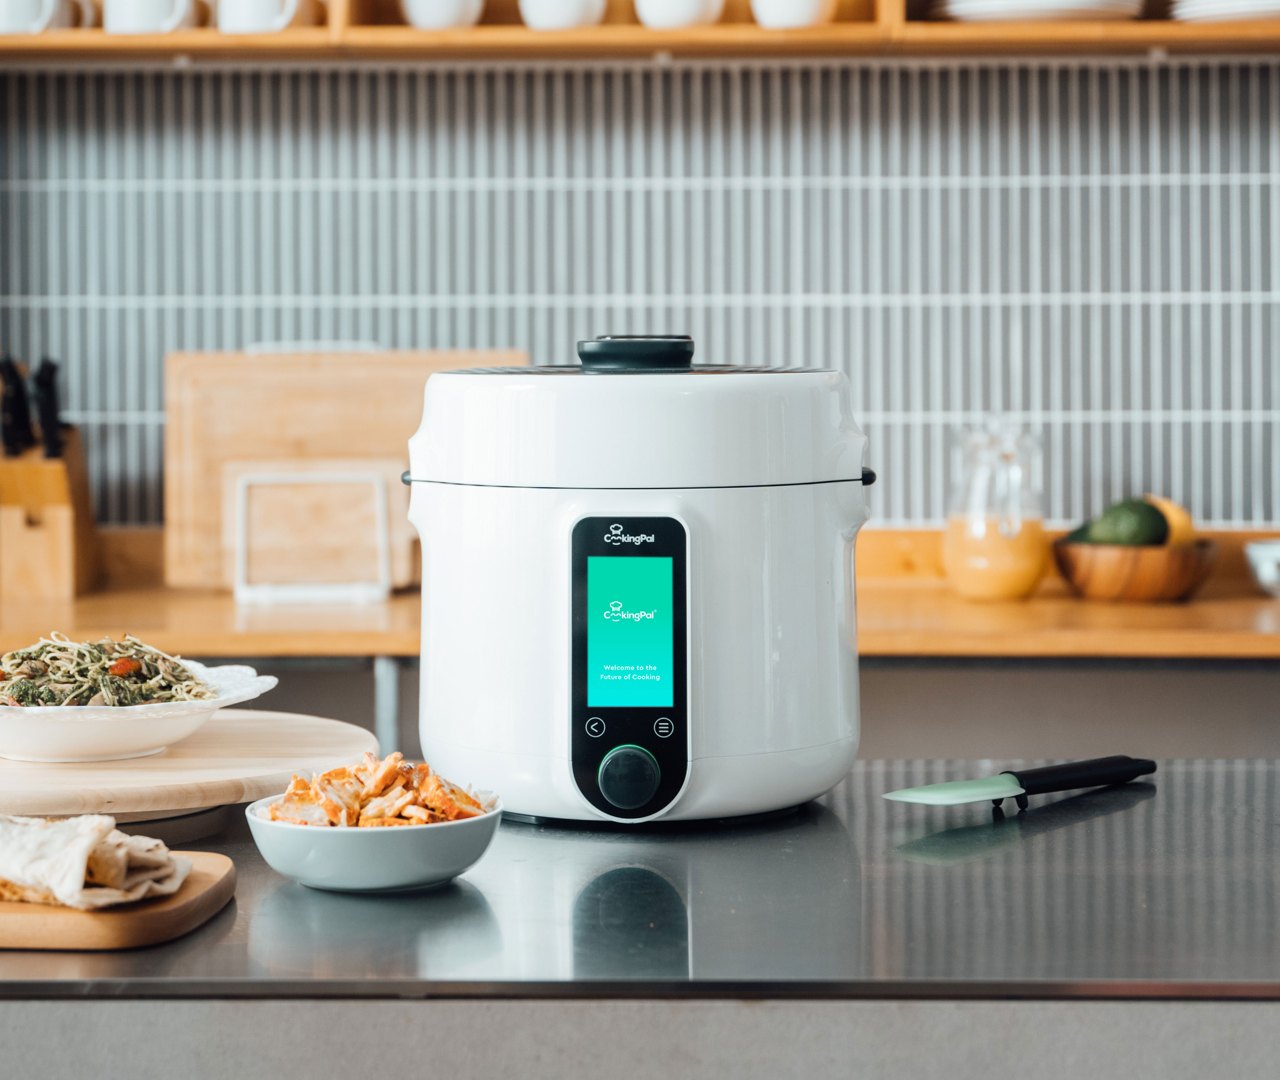 Chef iQ smart pressure cooker debuts at virtual CES 2021 - Reviewed